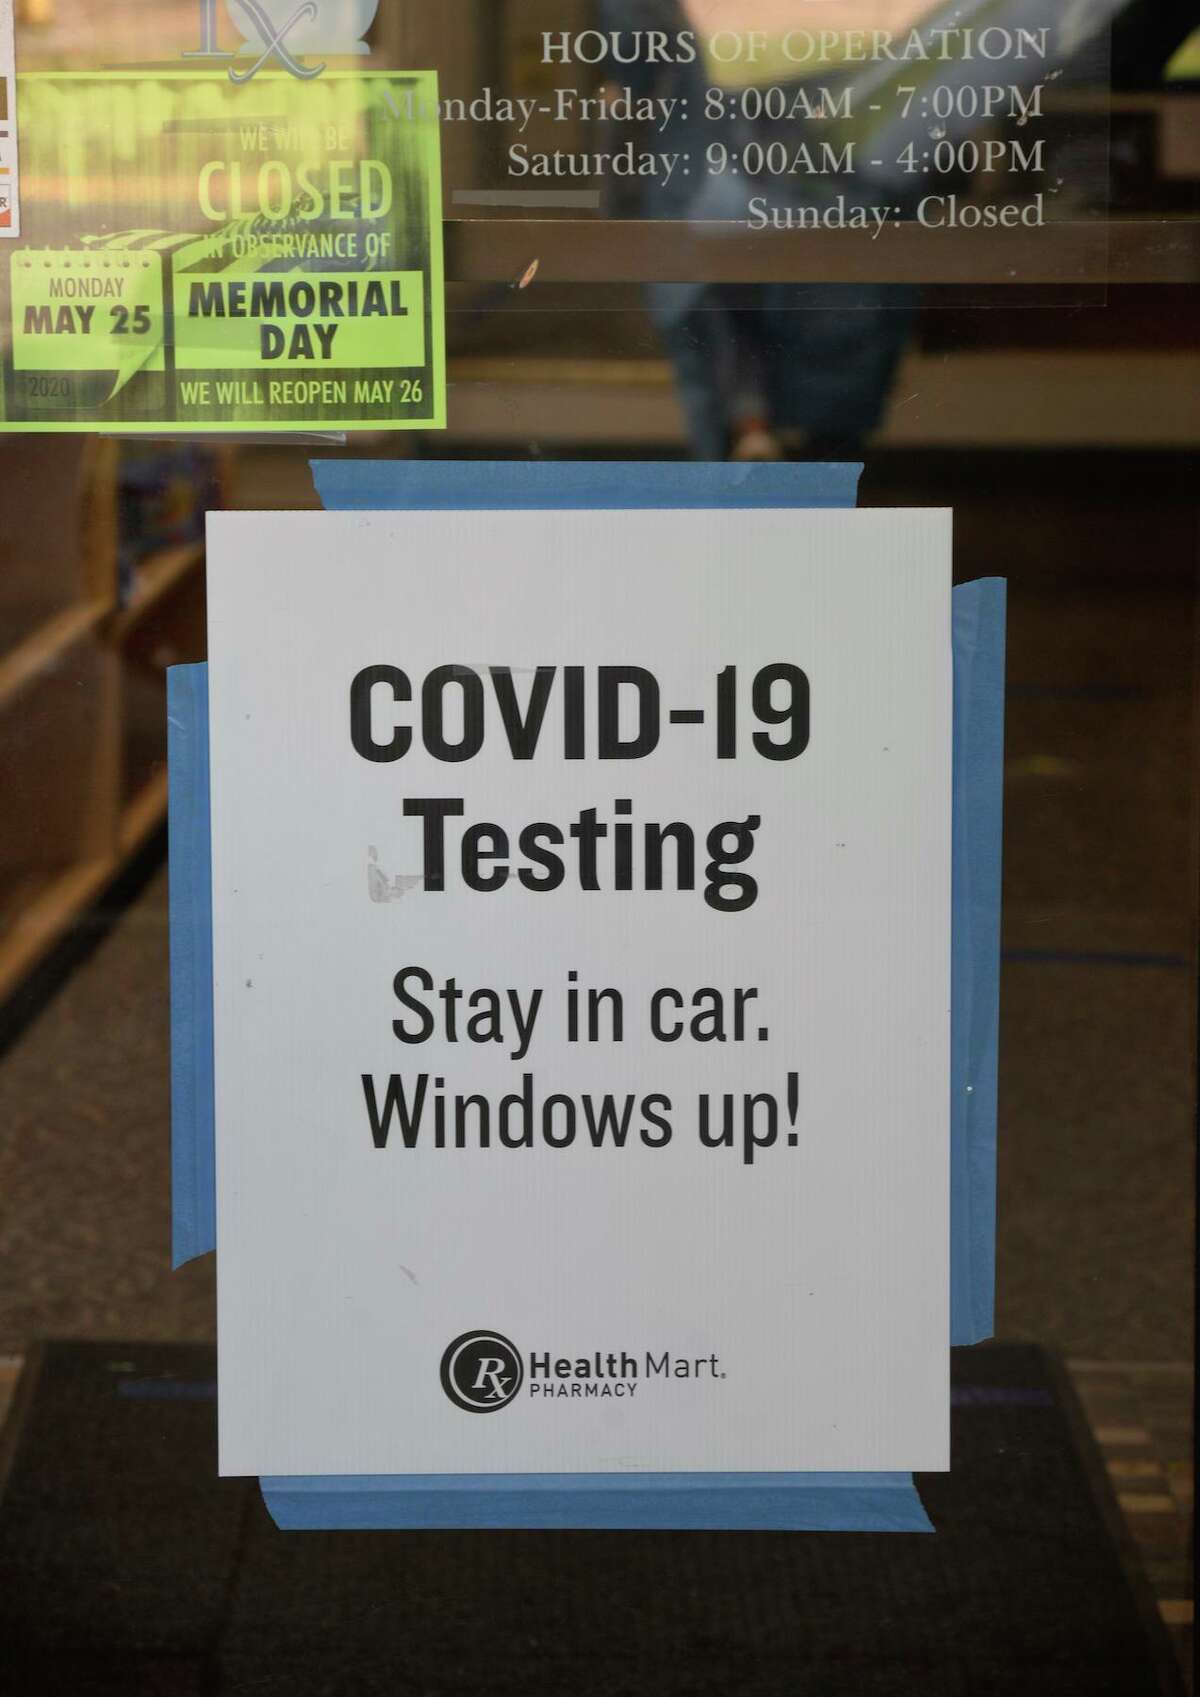 File photo of Main Street Pharmacy, which was offering self-administered coronavirus testing on Friday, May 22, 2020, in Danbury, Conn. The city was issued a COVID-19 alert by the state on Friday, Aug. 21, 2020, after a recent jump in cases.